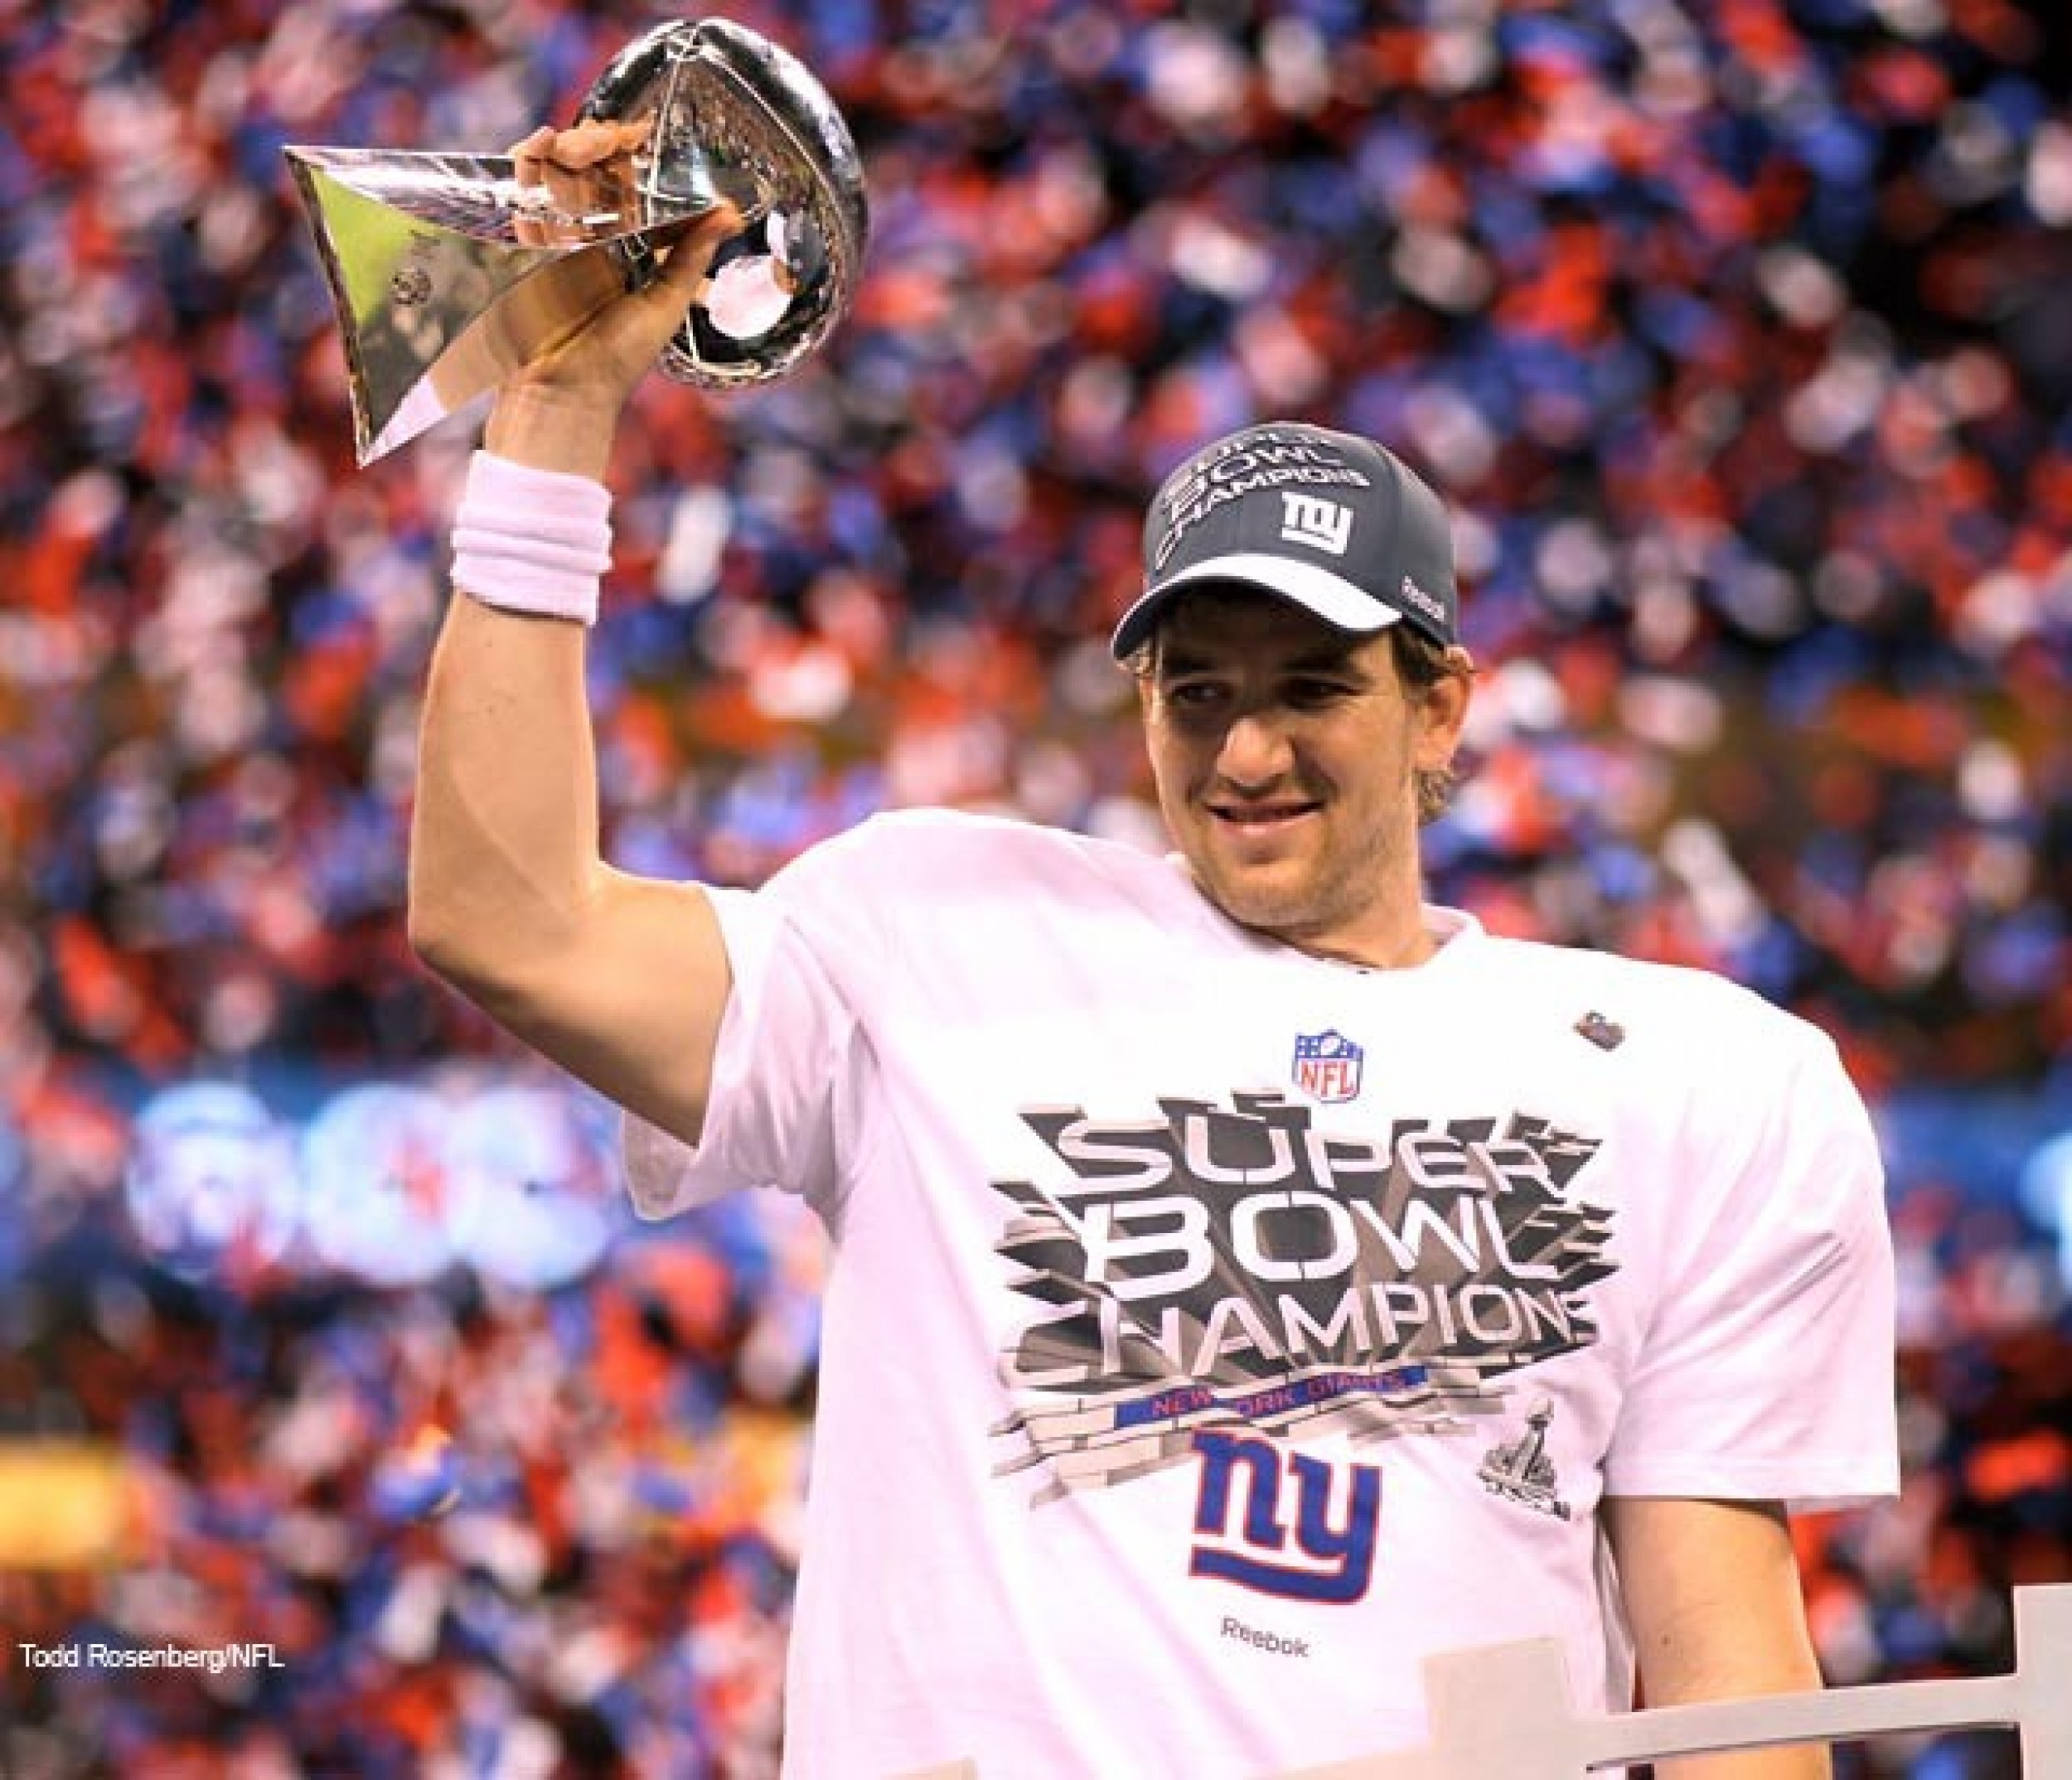 Eli Manning and the Giants will meet Barak Obama at 250 p.m. ET.